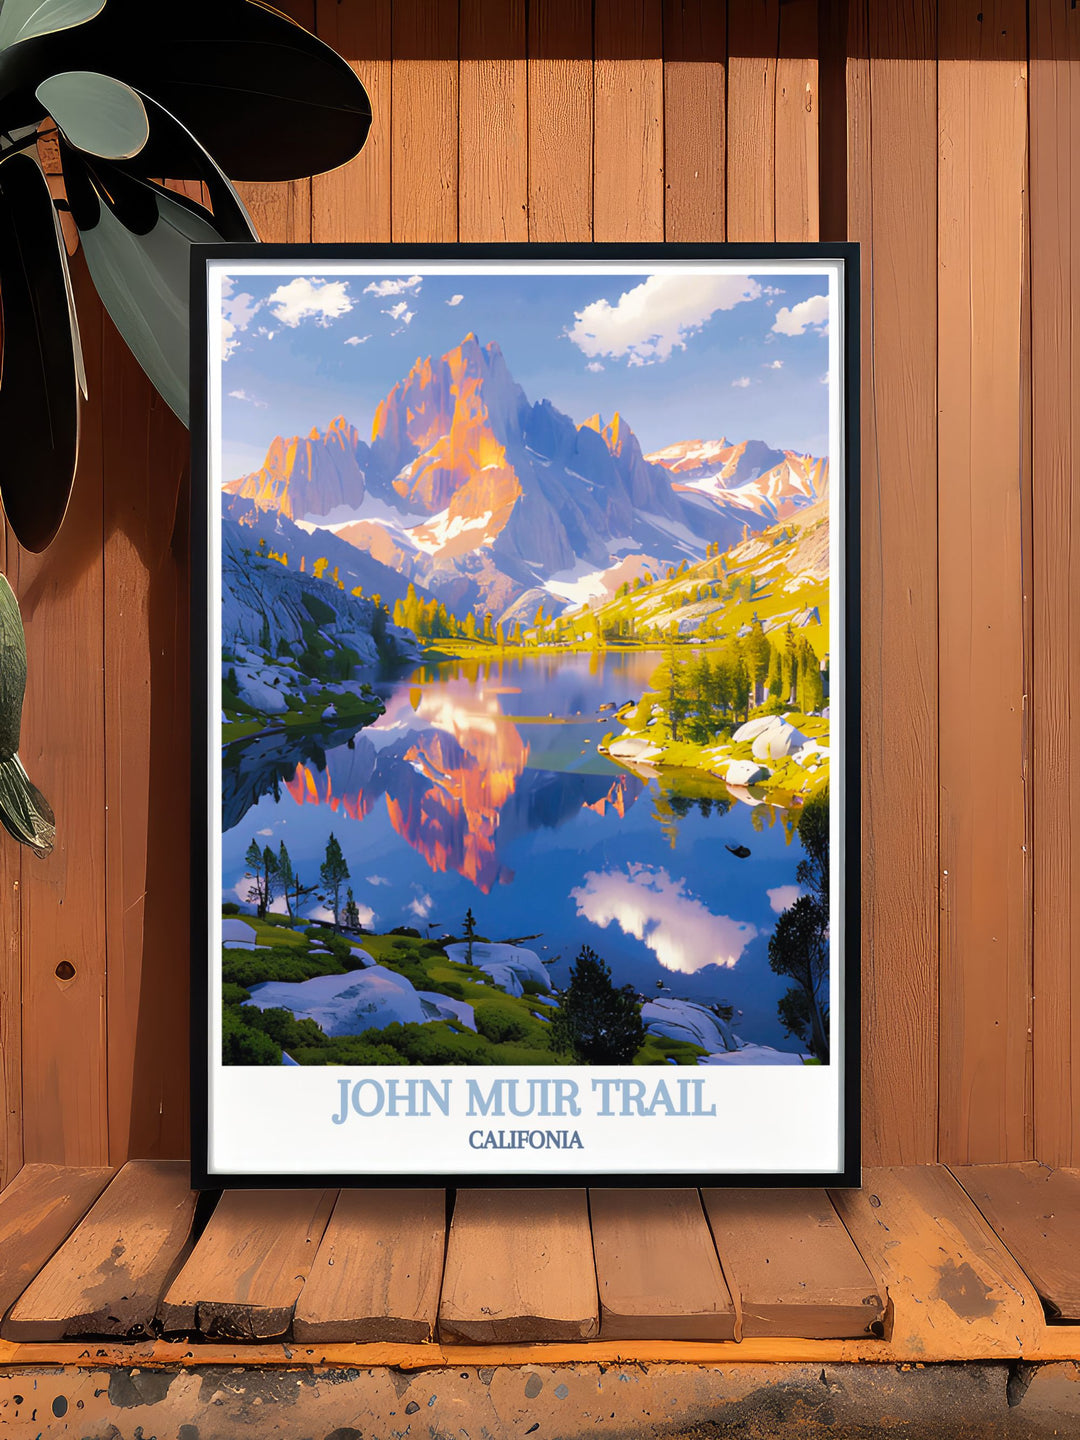 Highlighting the stunning scenery of the Ansel Adams Wilderness, this travel poster features dramatic landscapes and diverse ecosystems. Ideal for photography enthusiasts and outdoor adventurers, this piece brings the essence of the wilderness into your home.